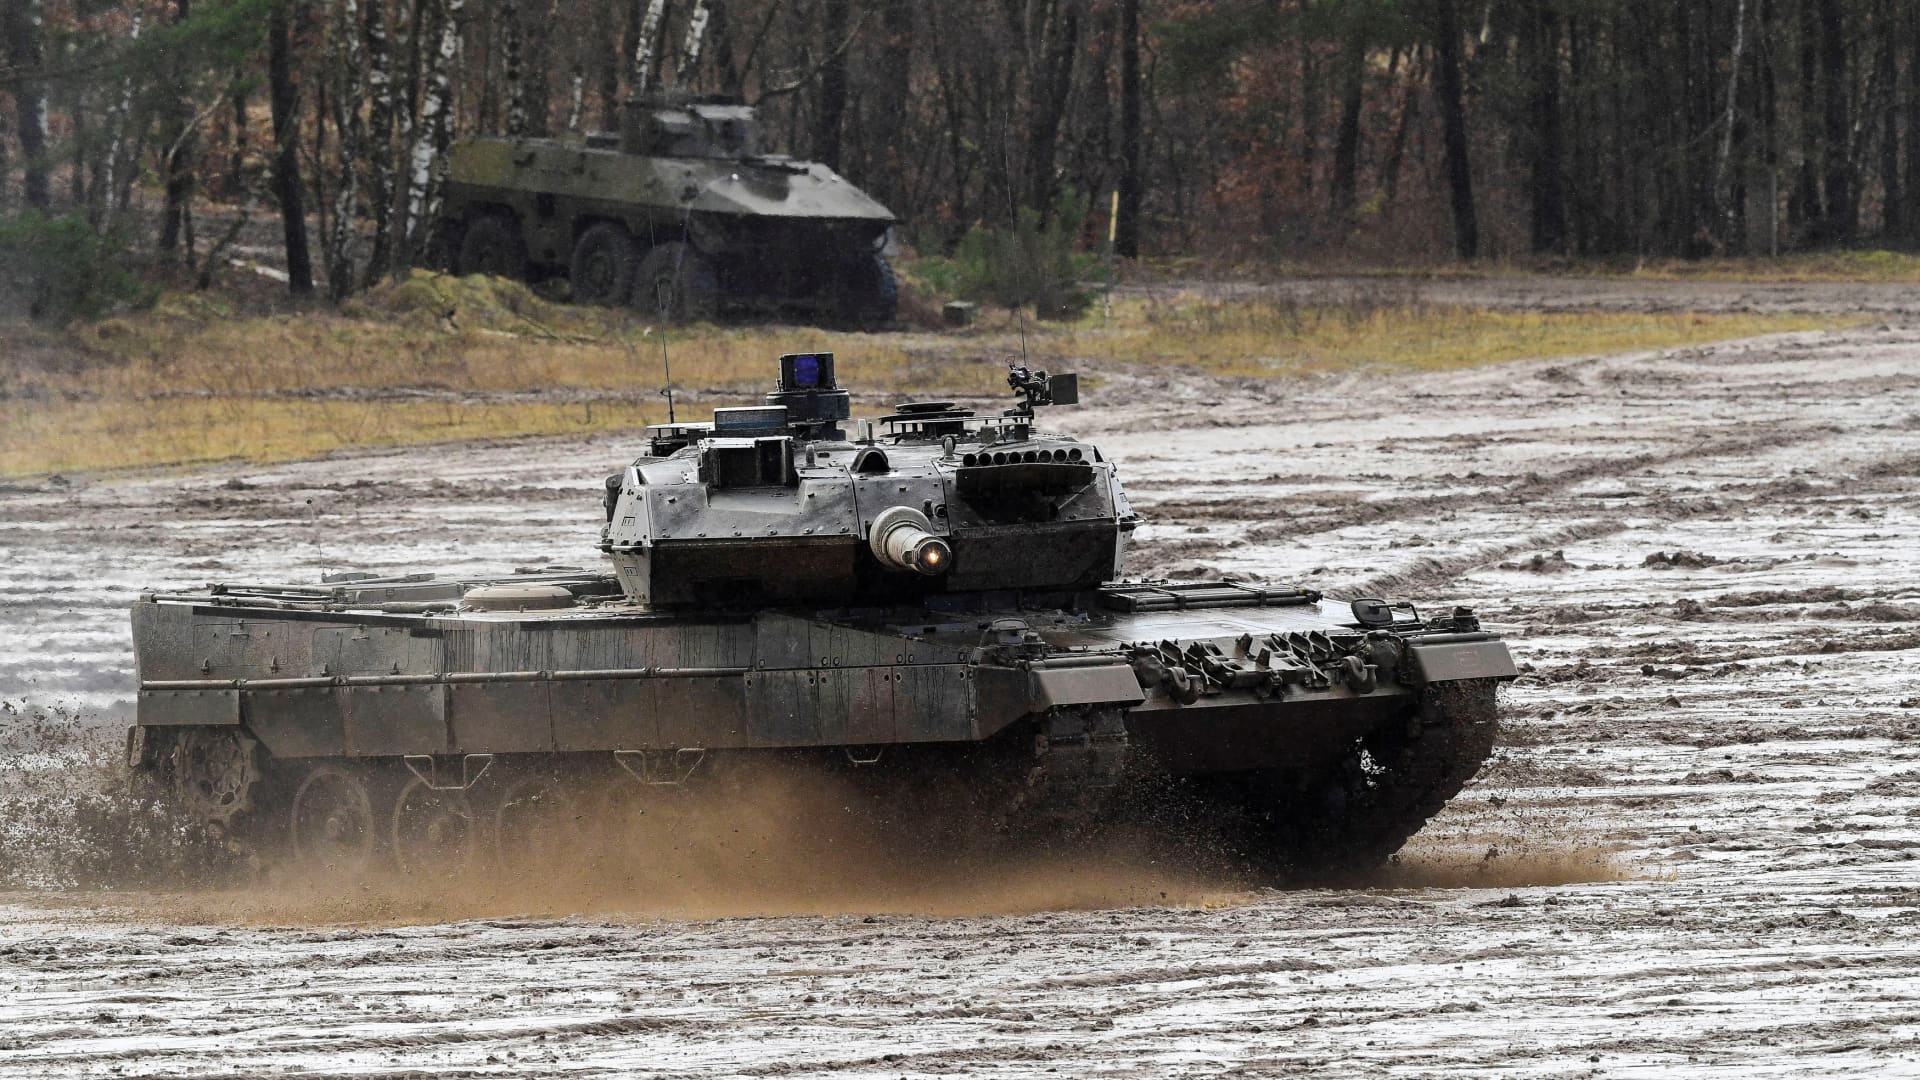 A Leopard tank is seen at the Munster military base, in Munster, Germany, February 7, 2022. 